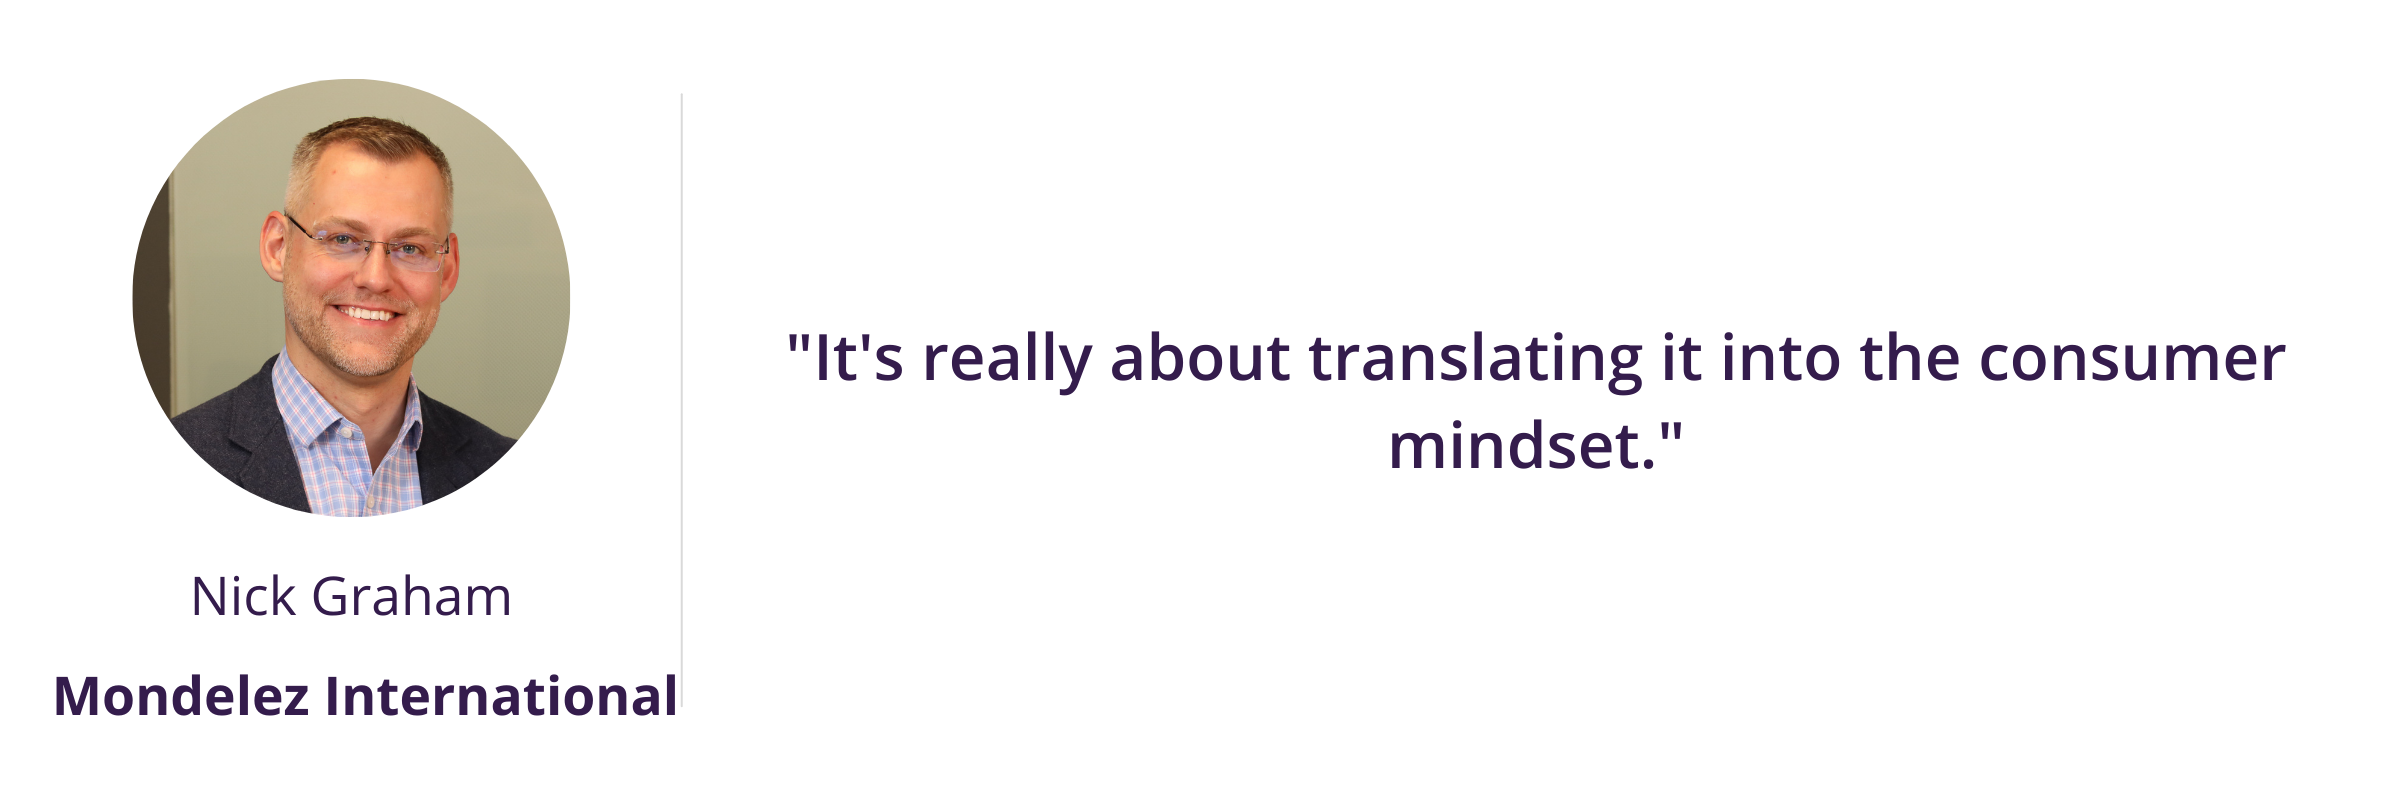 "It's really about translating it into the consumer mindset."